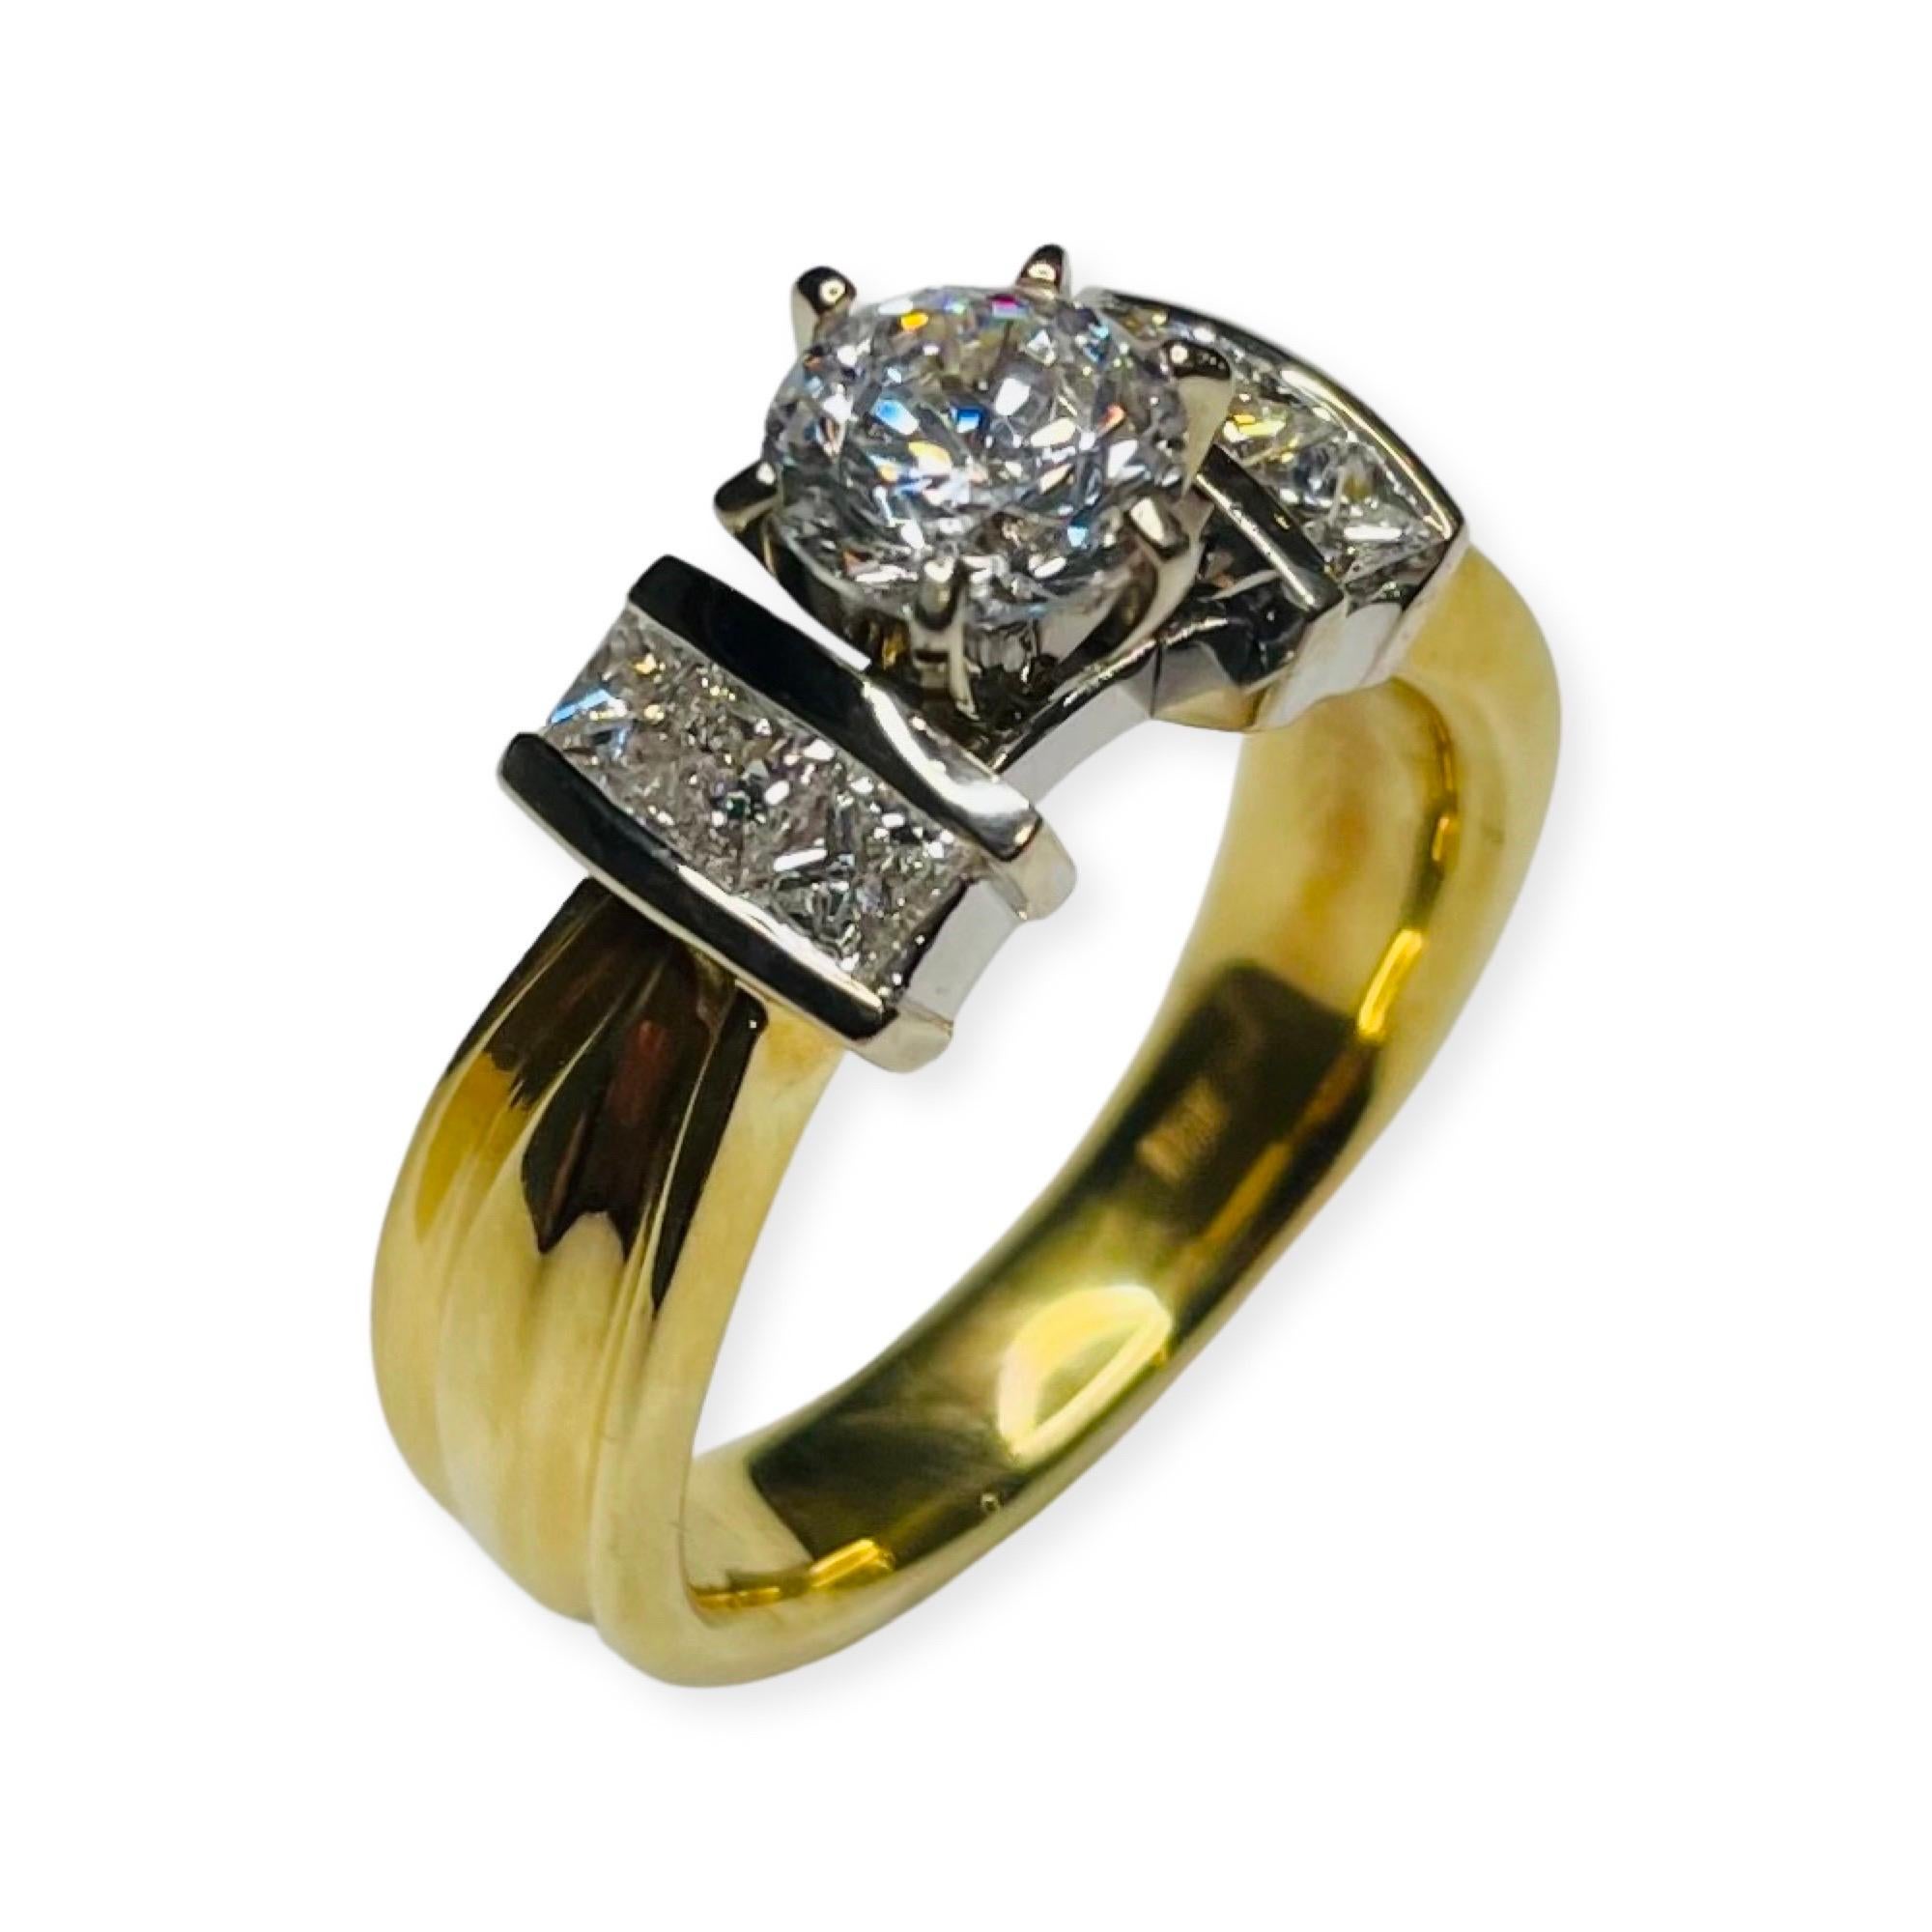 Lithos 18K White and Yellow Gold and Diamond Engagement Ring In New Condition For Sale In Kirkwood, MO